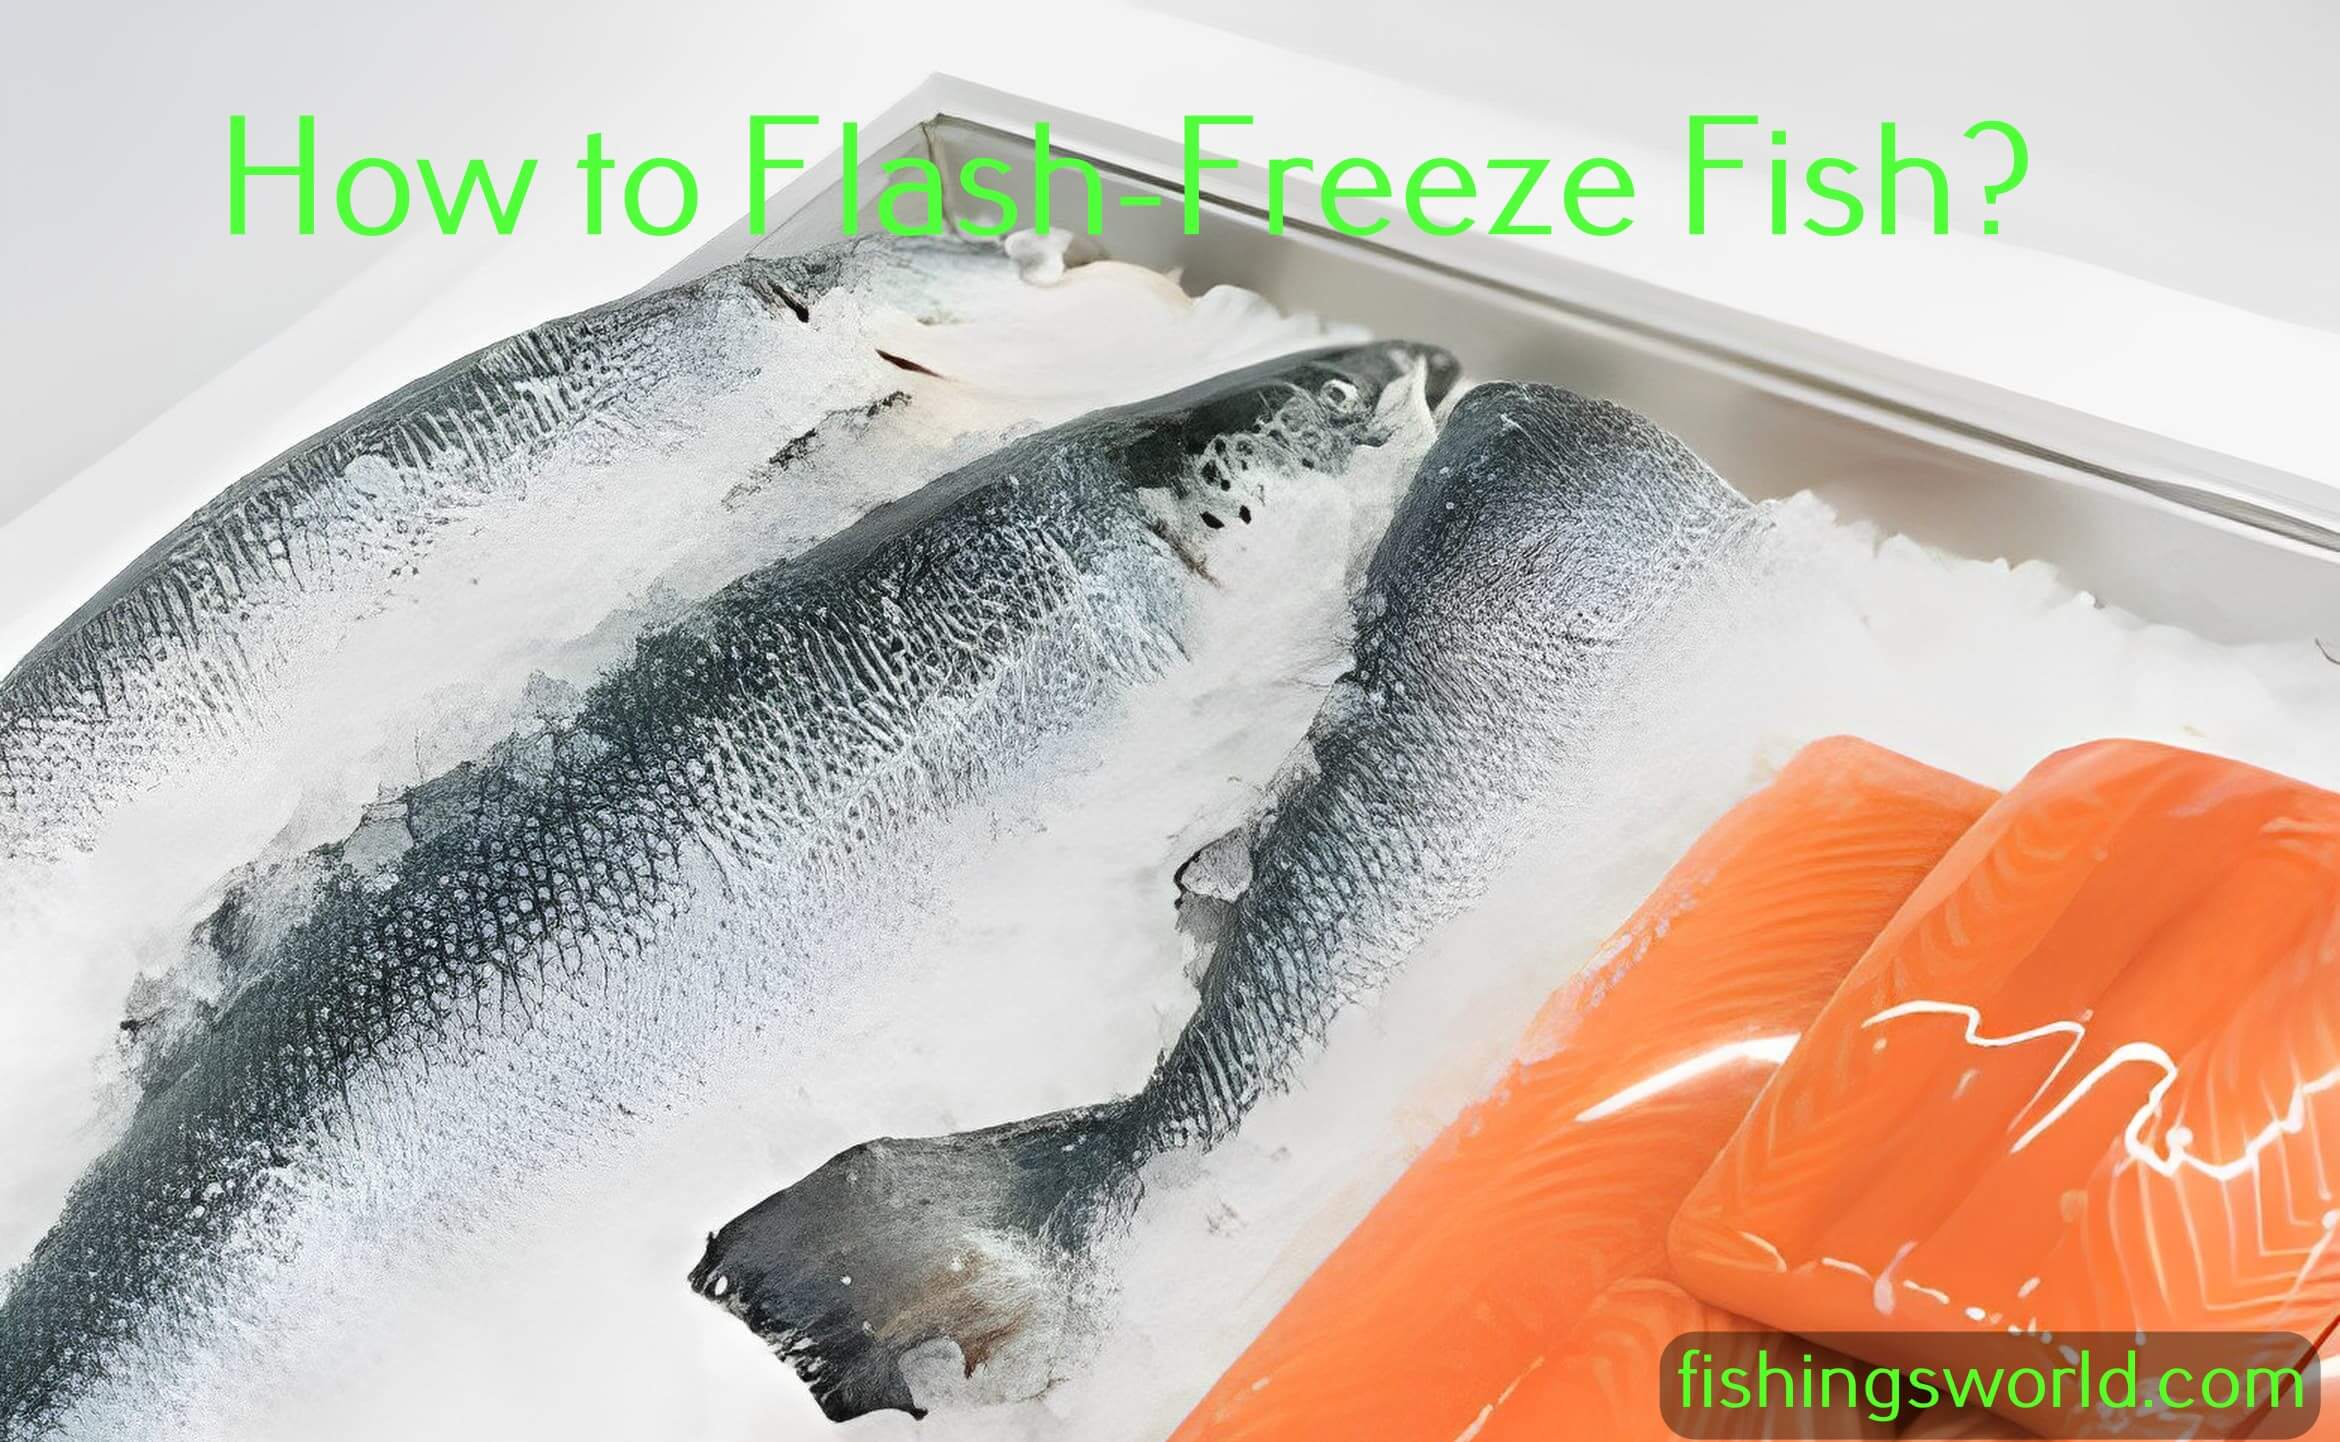 How to Flash-Freeze Fish: A Step-by-Step Guide